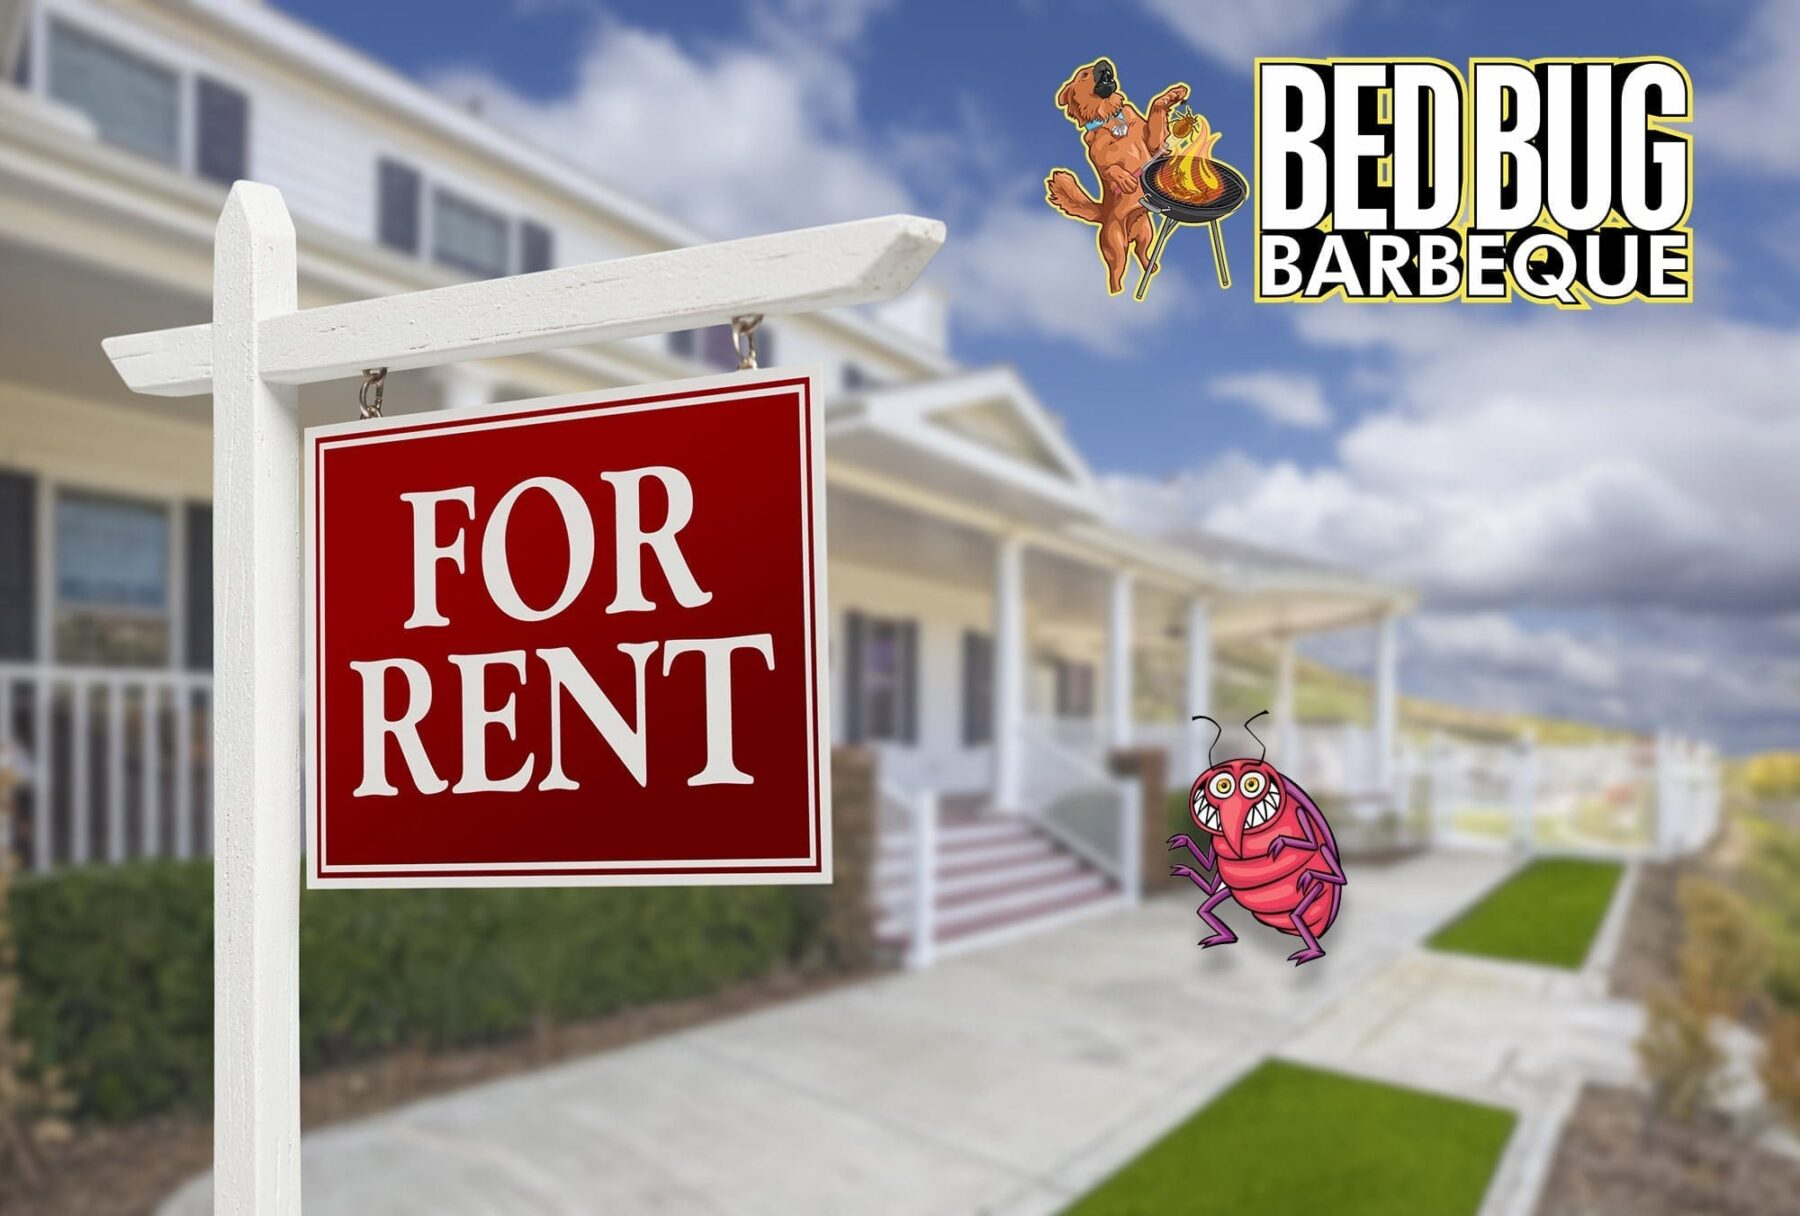 Bed bug cartoon next to for rent sign